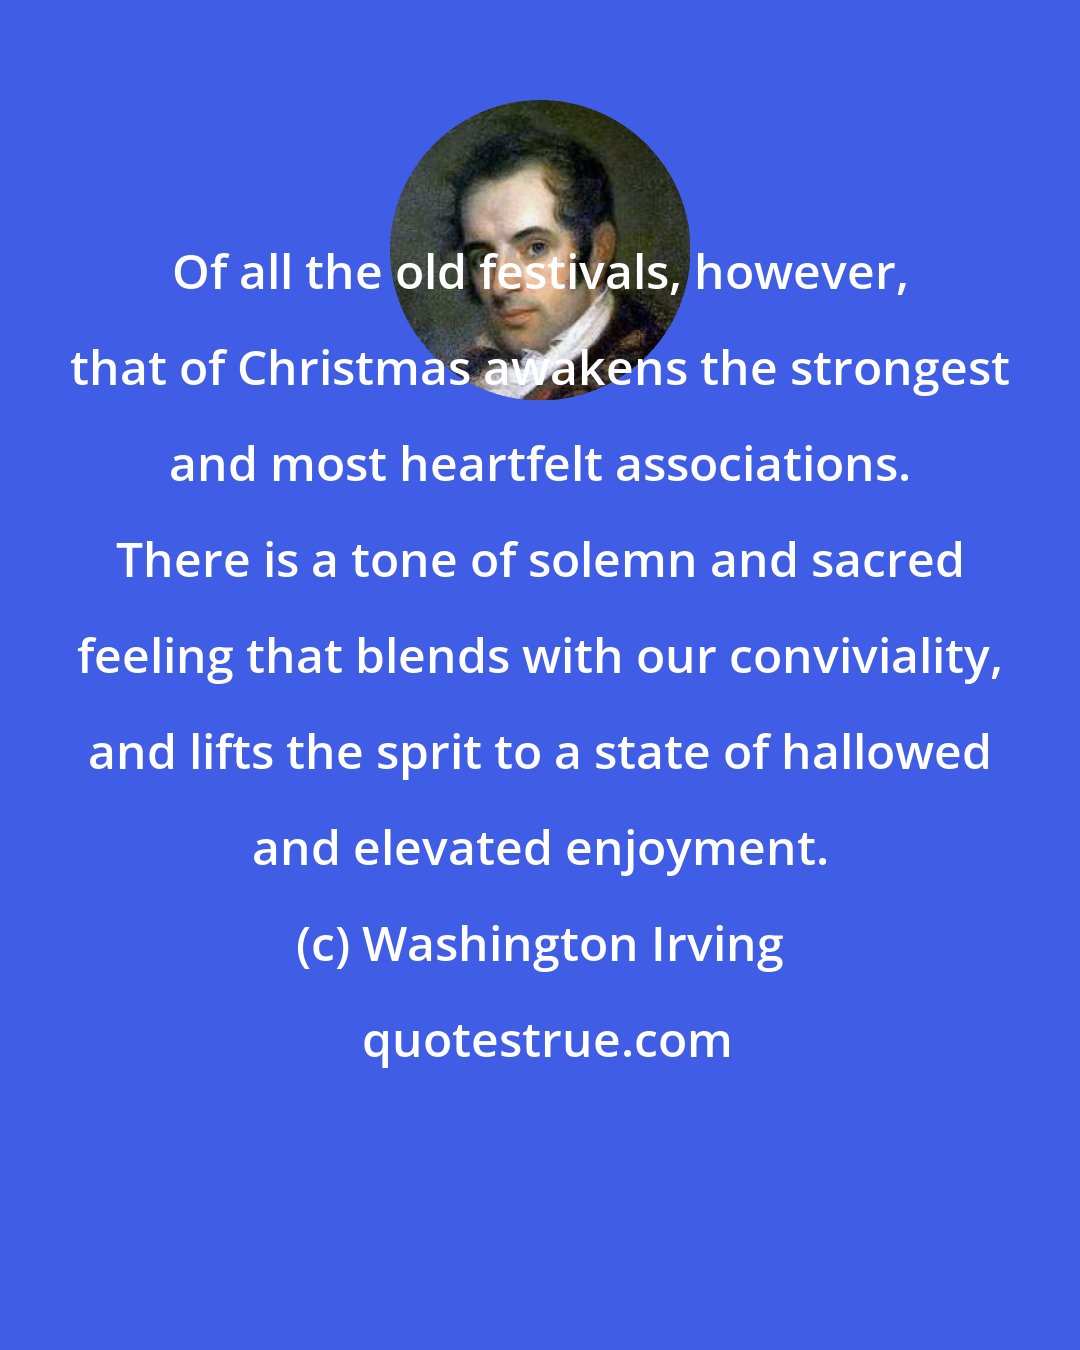 Washington Irving: Of all the old festivals, however, that of Christmas awakens the strongest and most heartfelt associations. There is a tone of solemn and sacred feeling that blends with our conviviality, and lifts the sprit to a state of hallowed and elevated enjoyment.